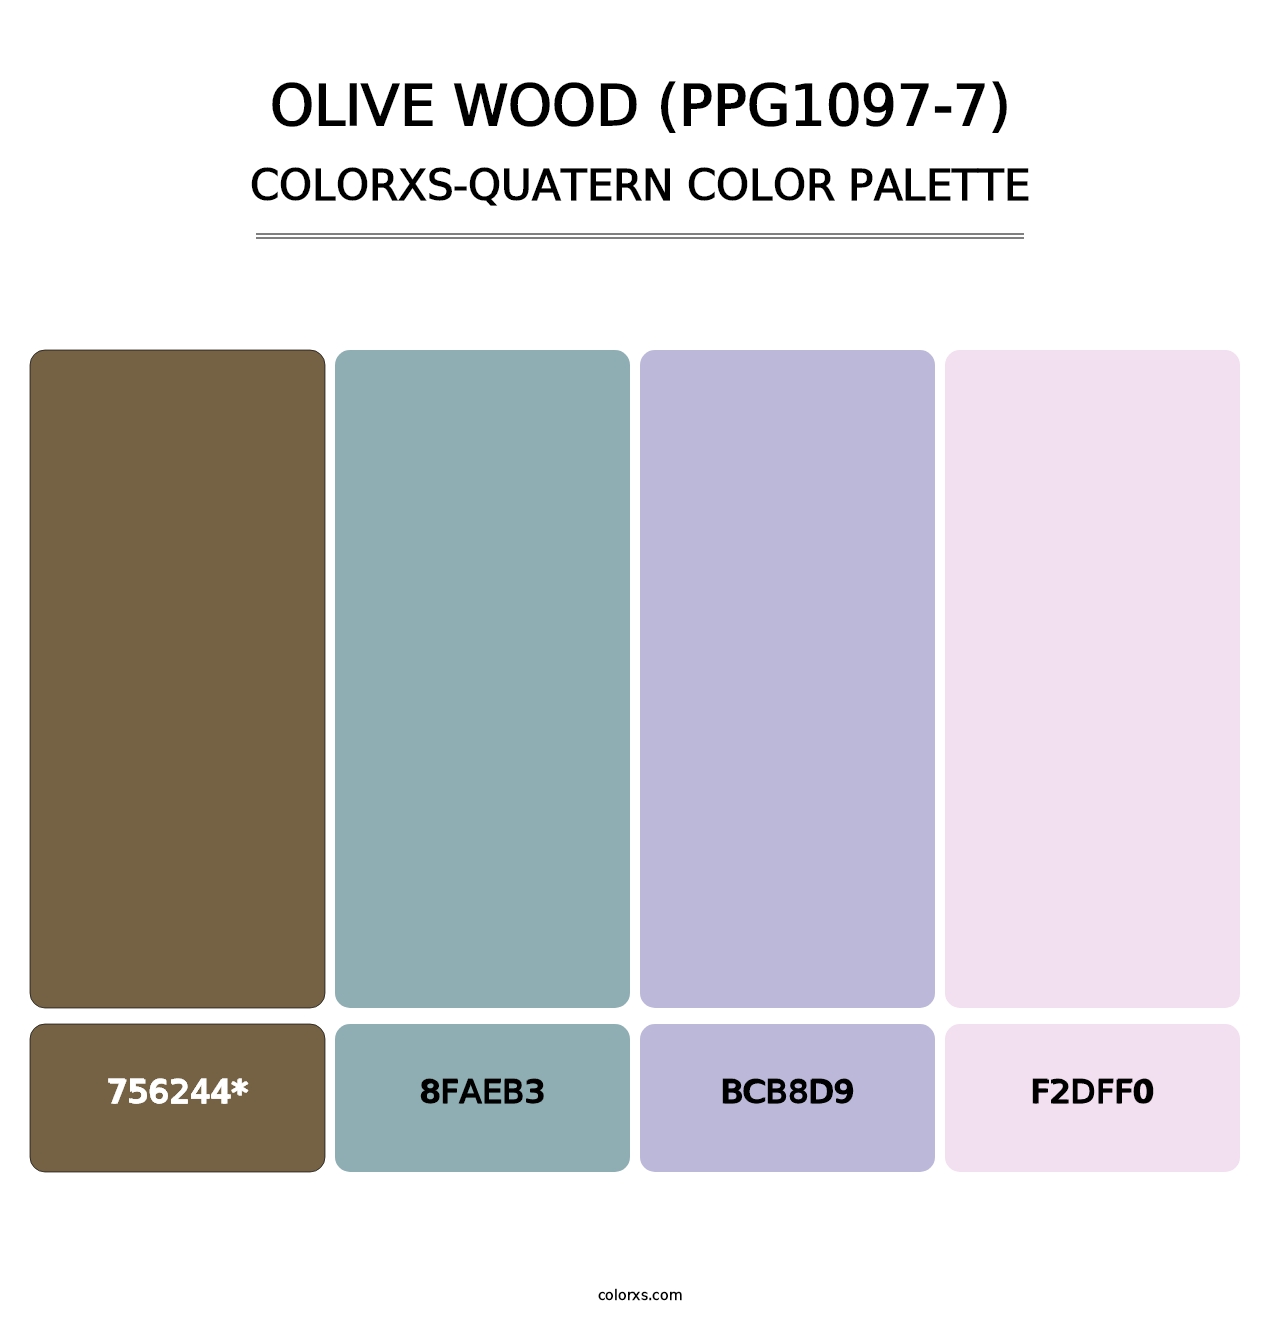 Olive Wood (PPG1097-7) - Colorxs Quatern Palette